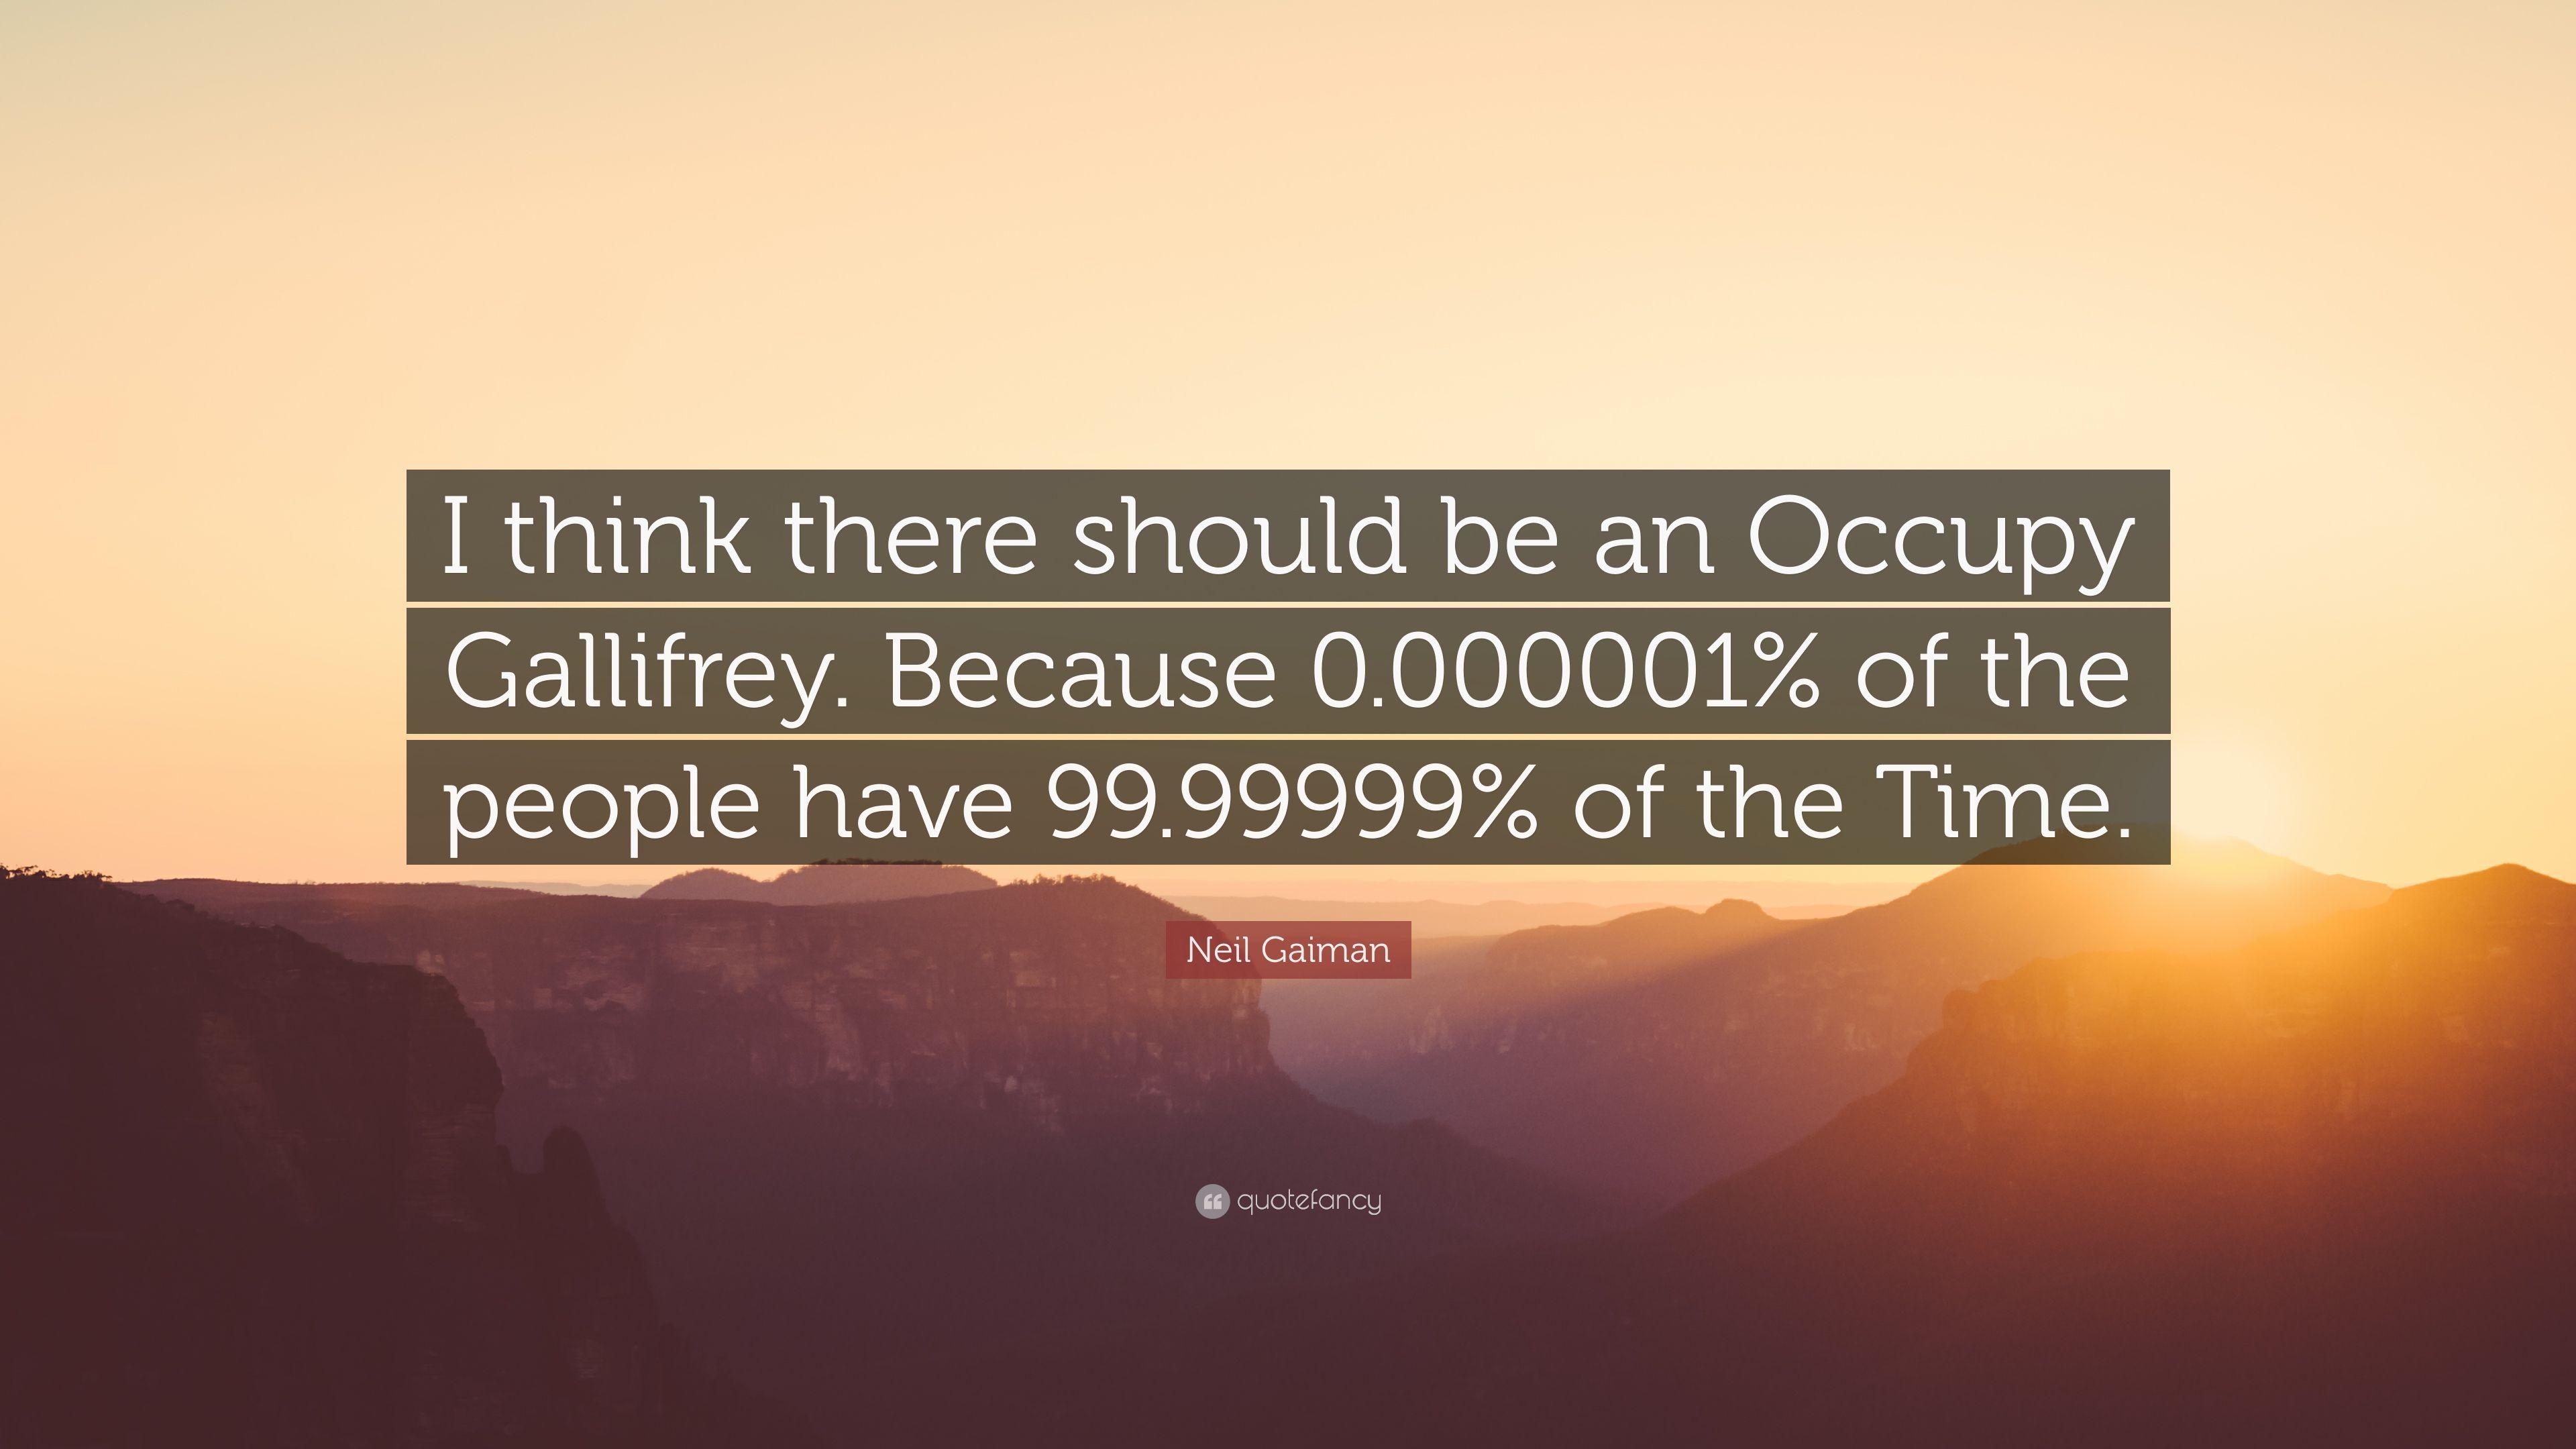 Neil Gaiman Quote: “I think there should be an Occupy Gallifrey